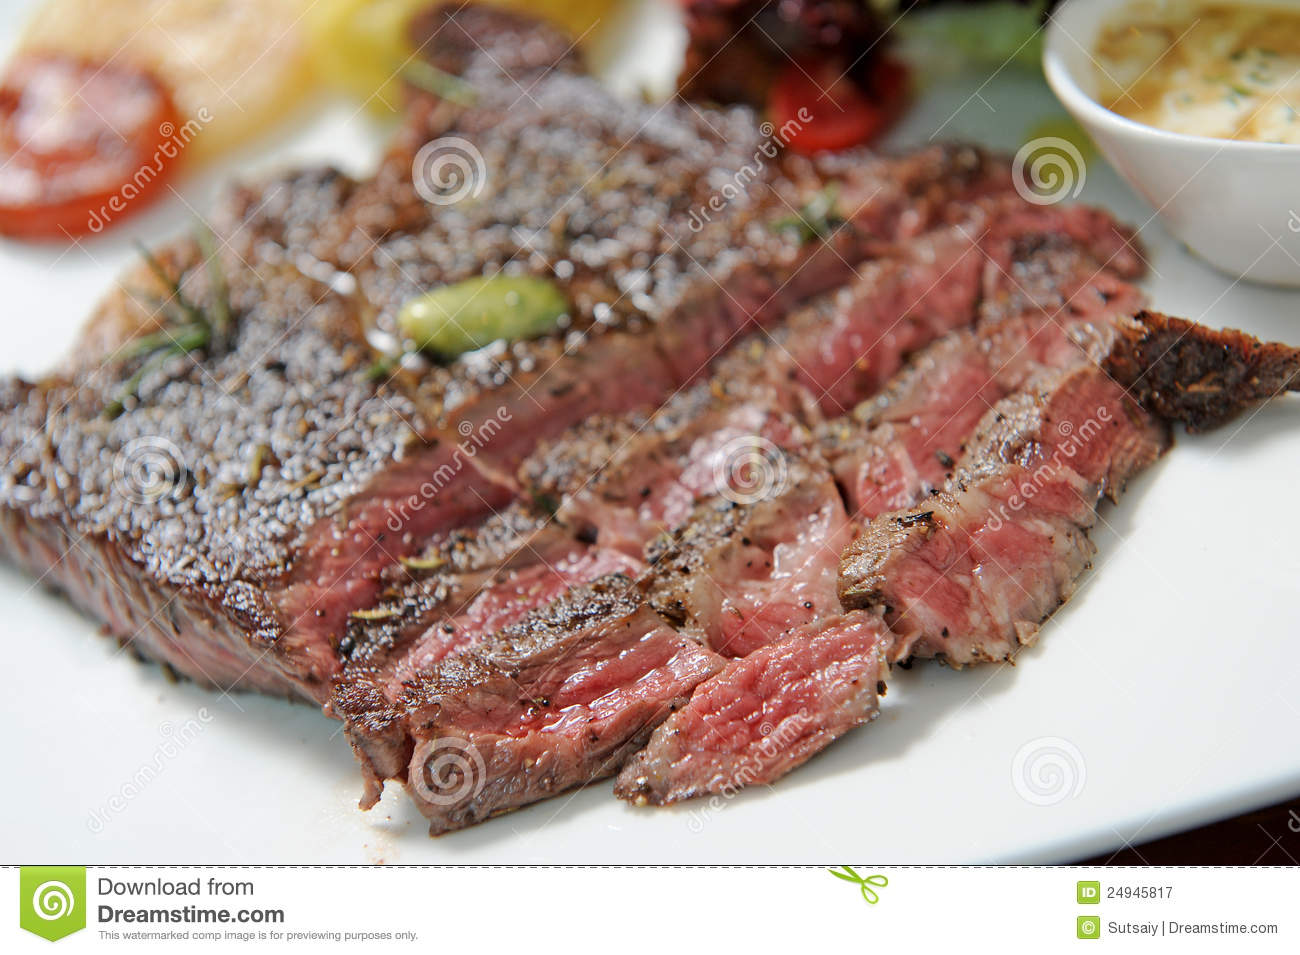 Eating A Steak Royalty Free Stock Photography   Image  24945817